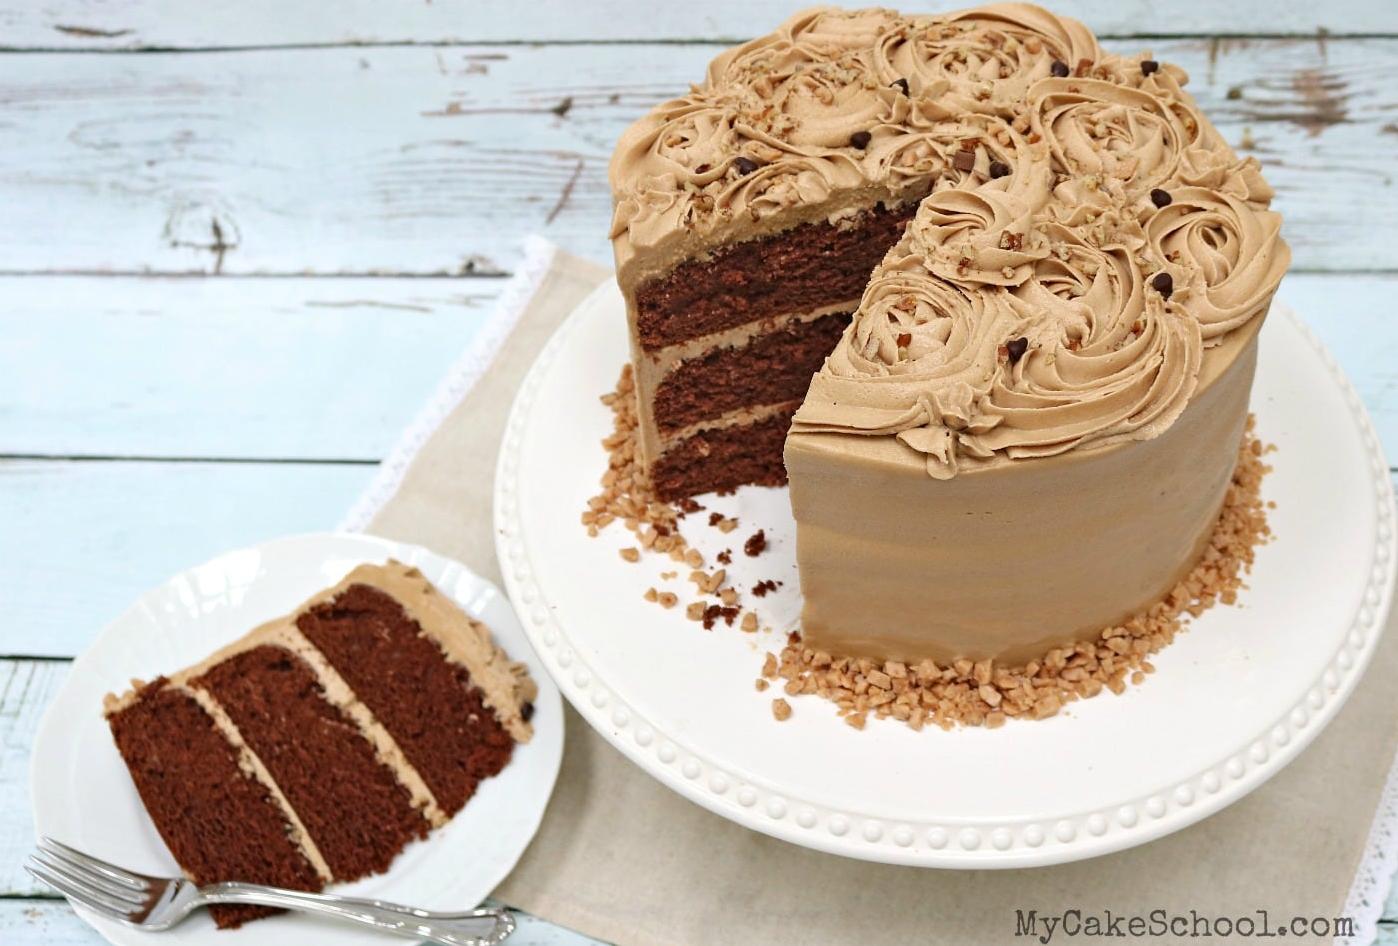  The coffee-toffee crunch topping adds a delightful texture to this cake